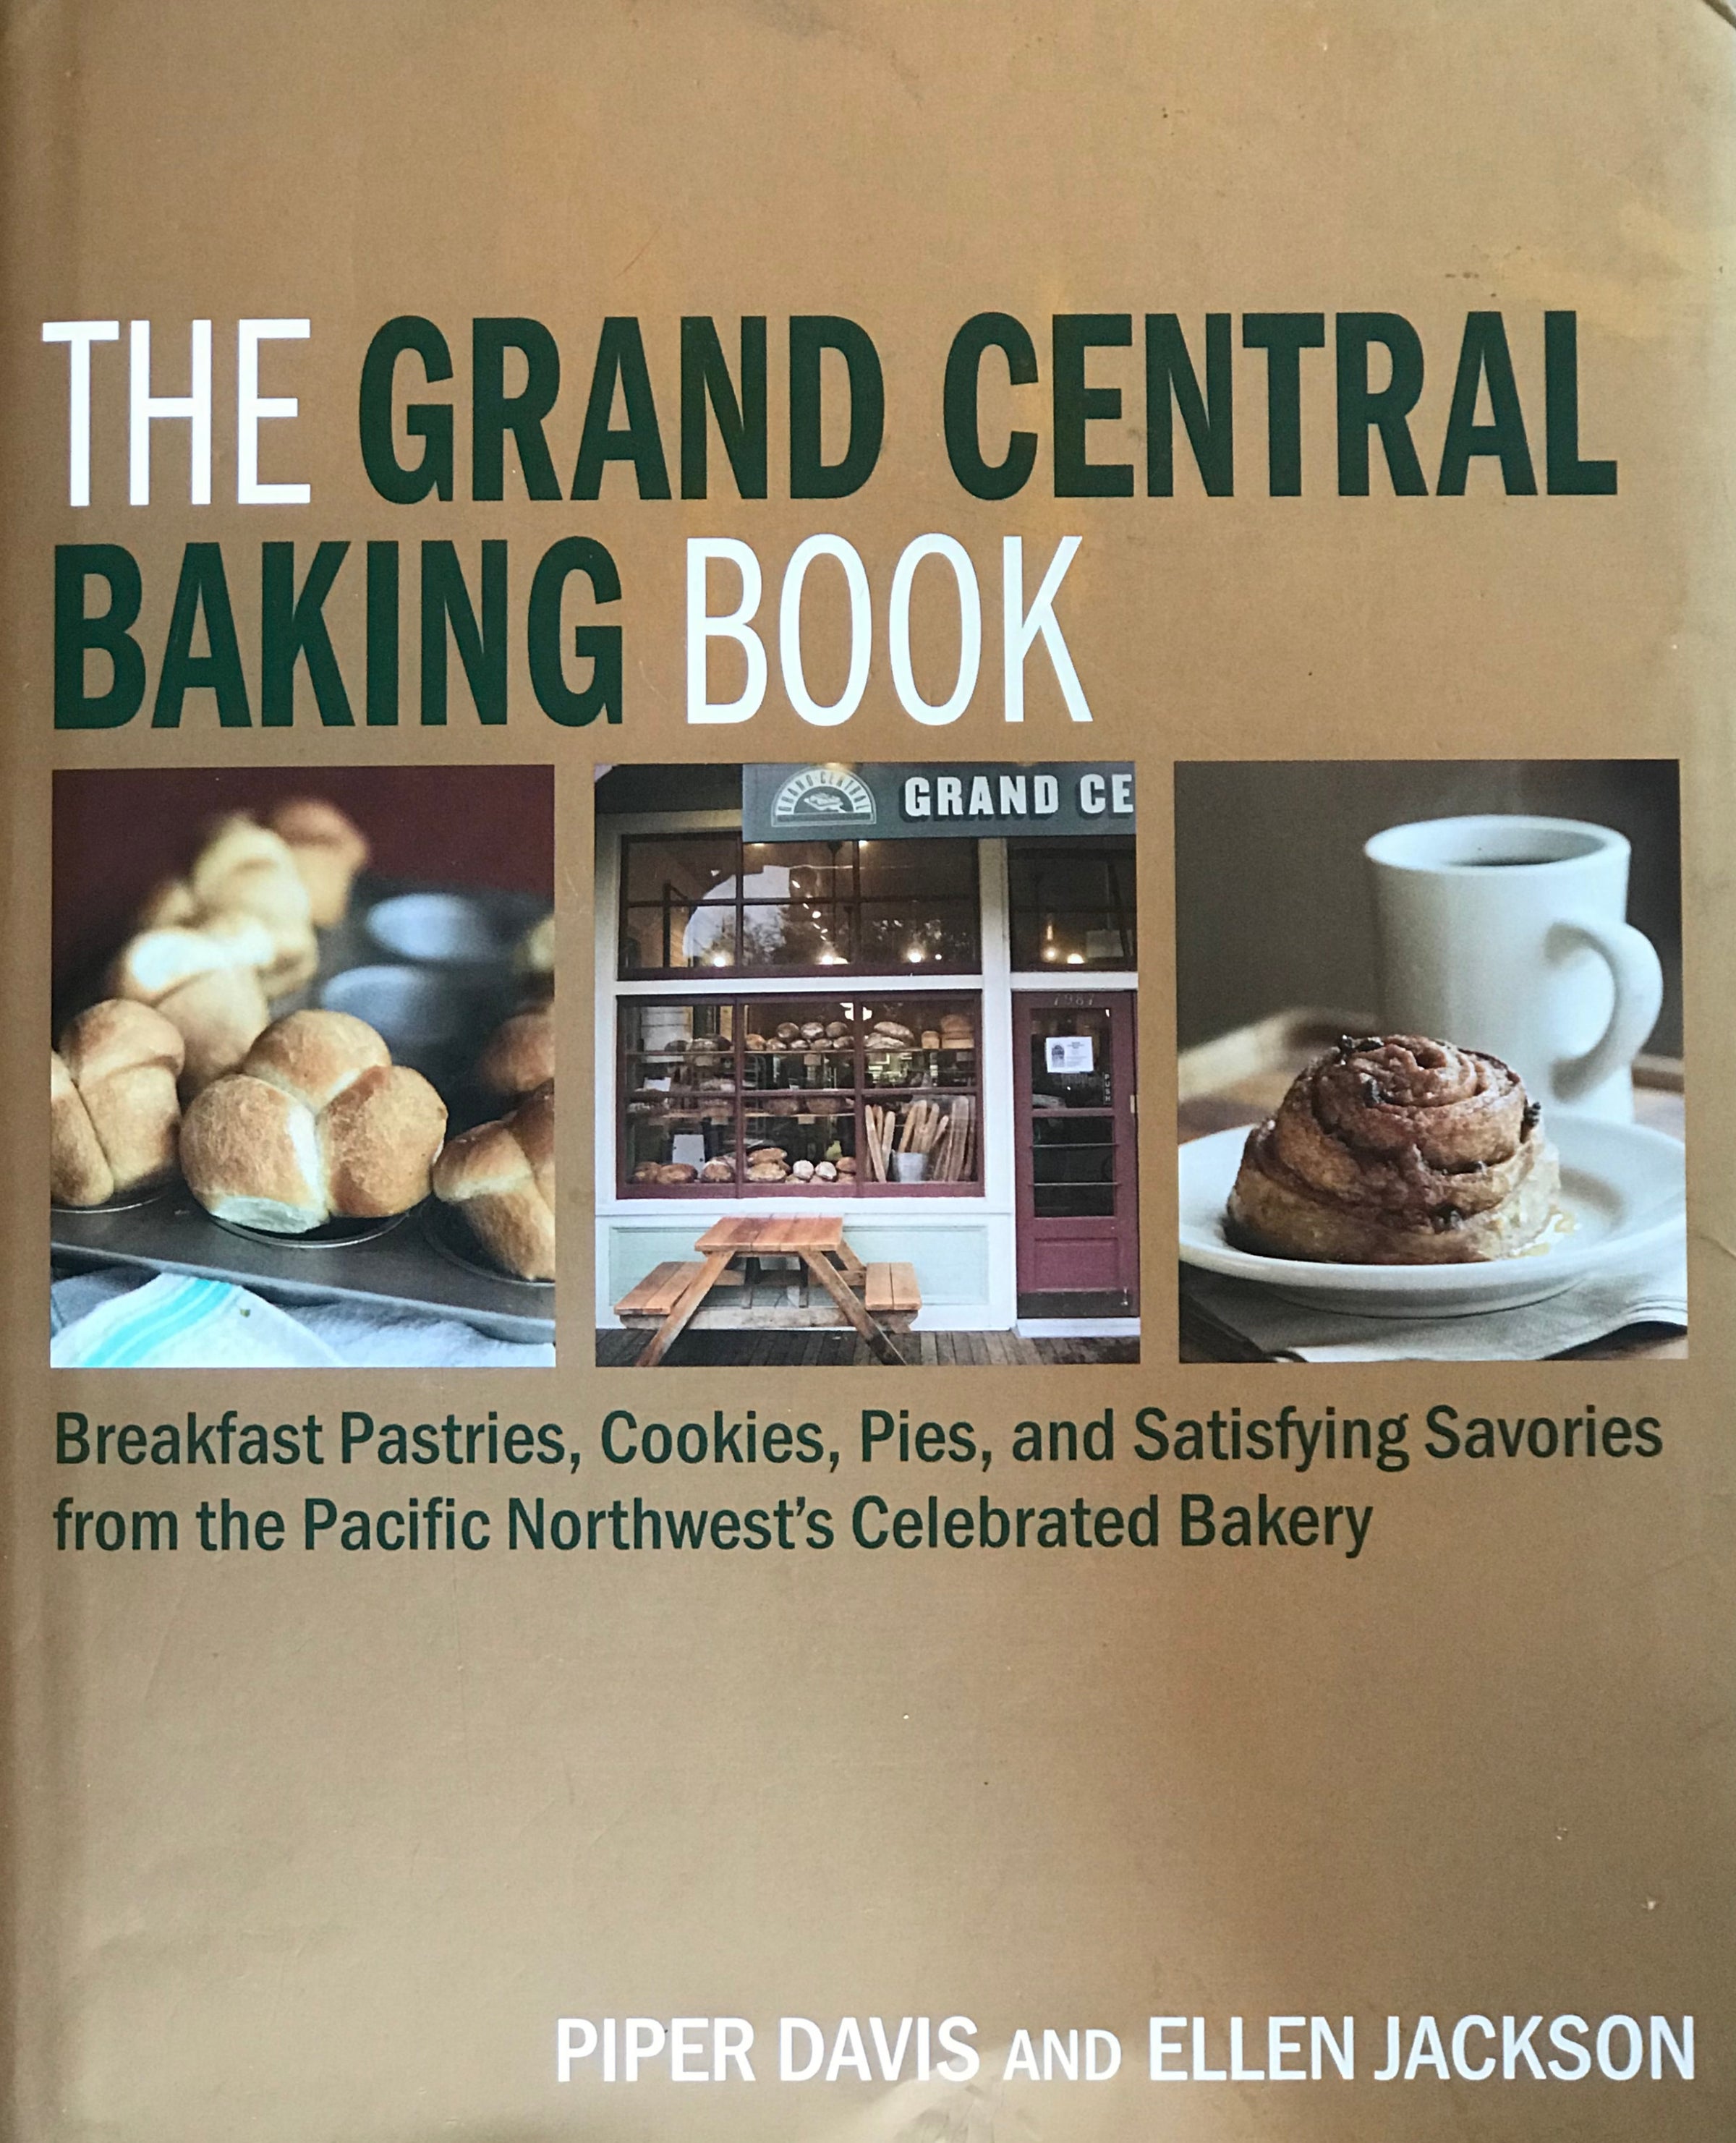 Grand Central Bakery